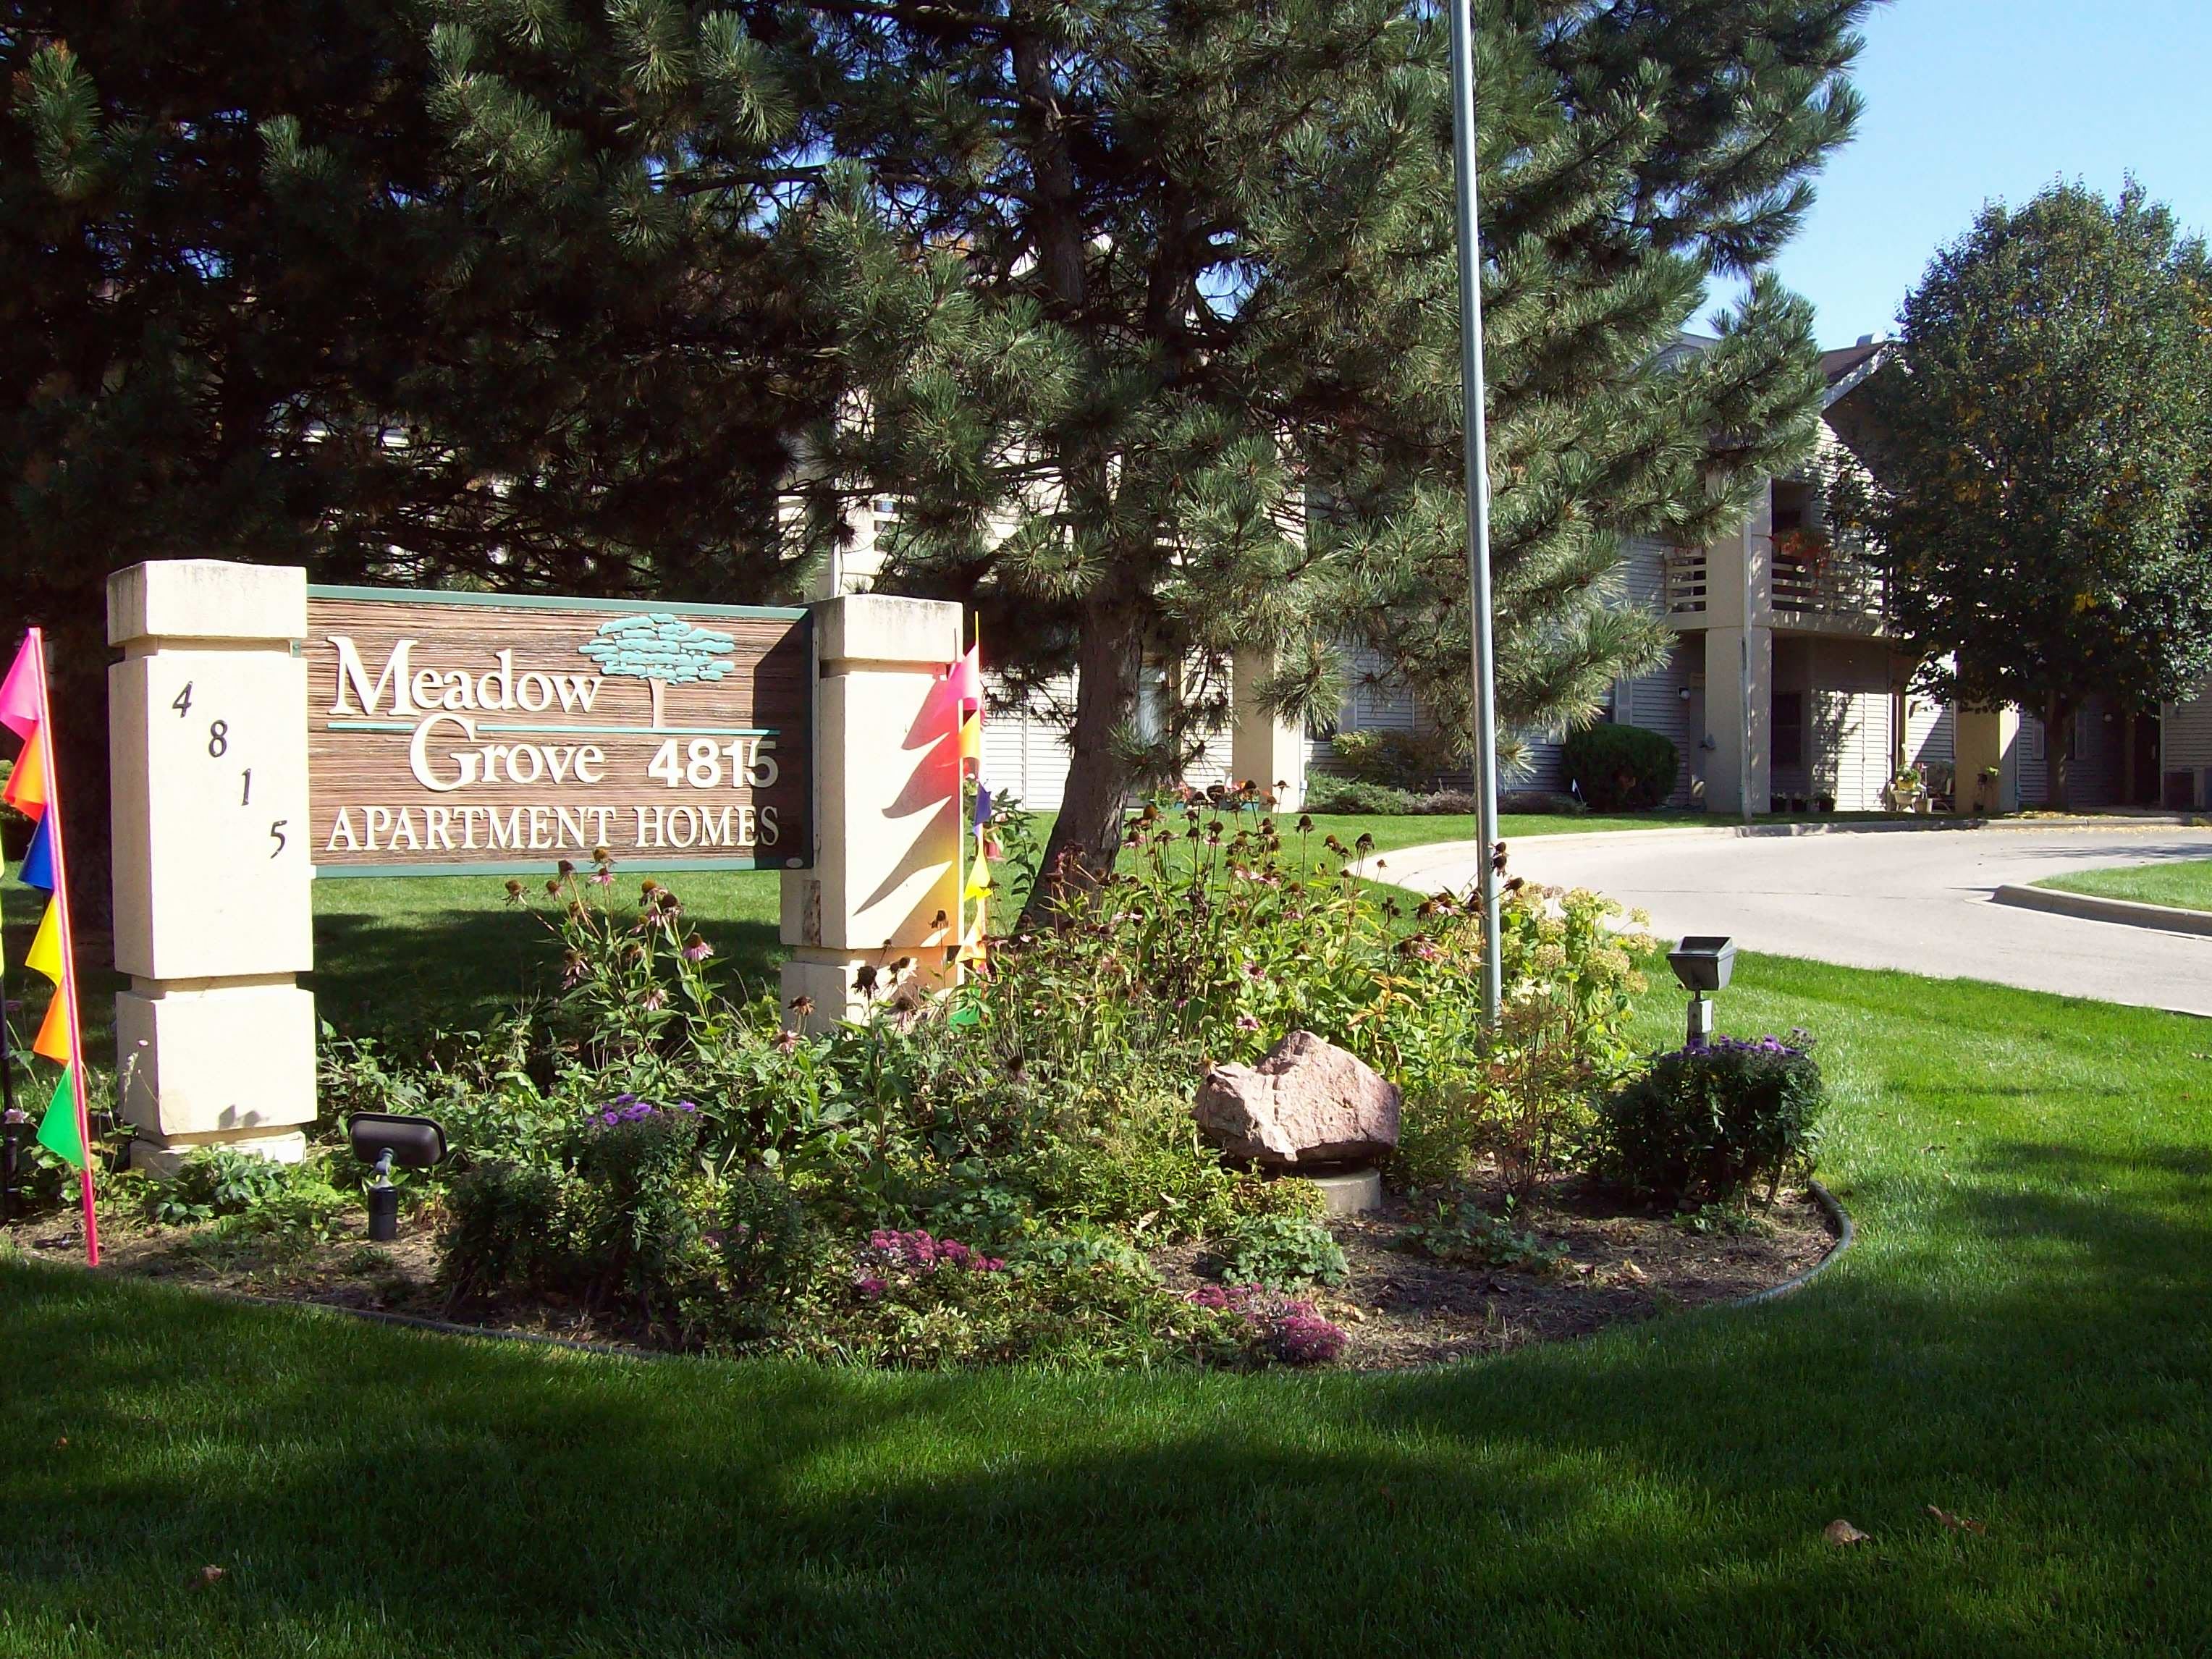 Meadow Grove Apartments